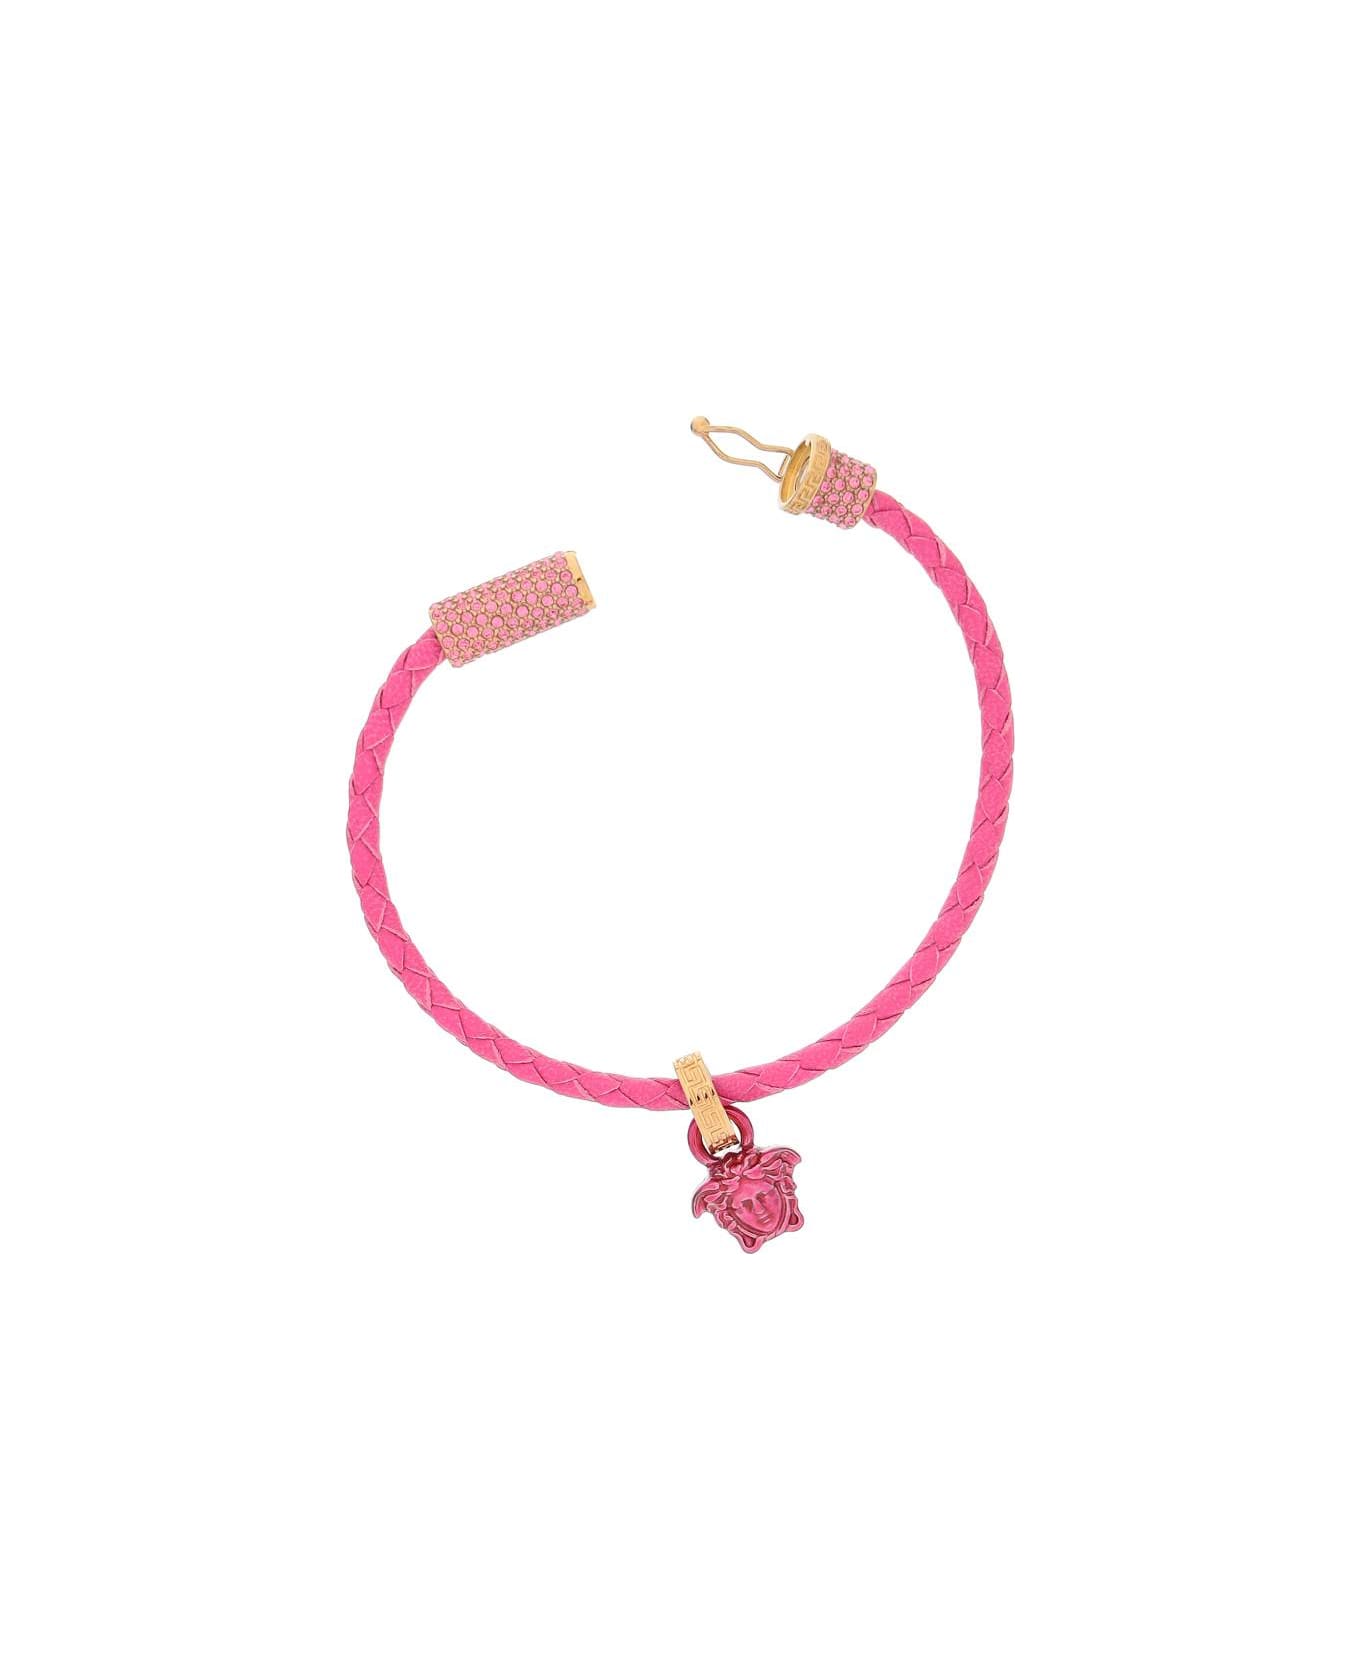 Versace Braided Leather Bracelet - Glossy Pink-oro Versace